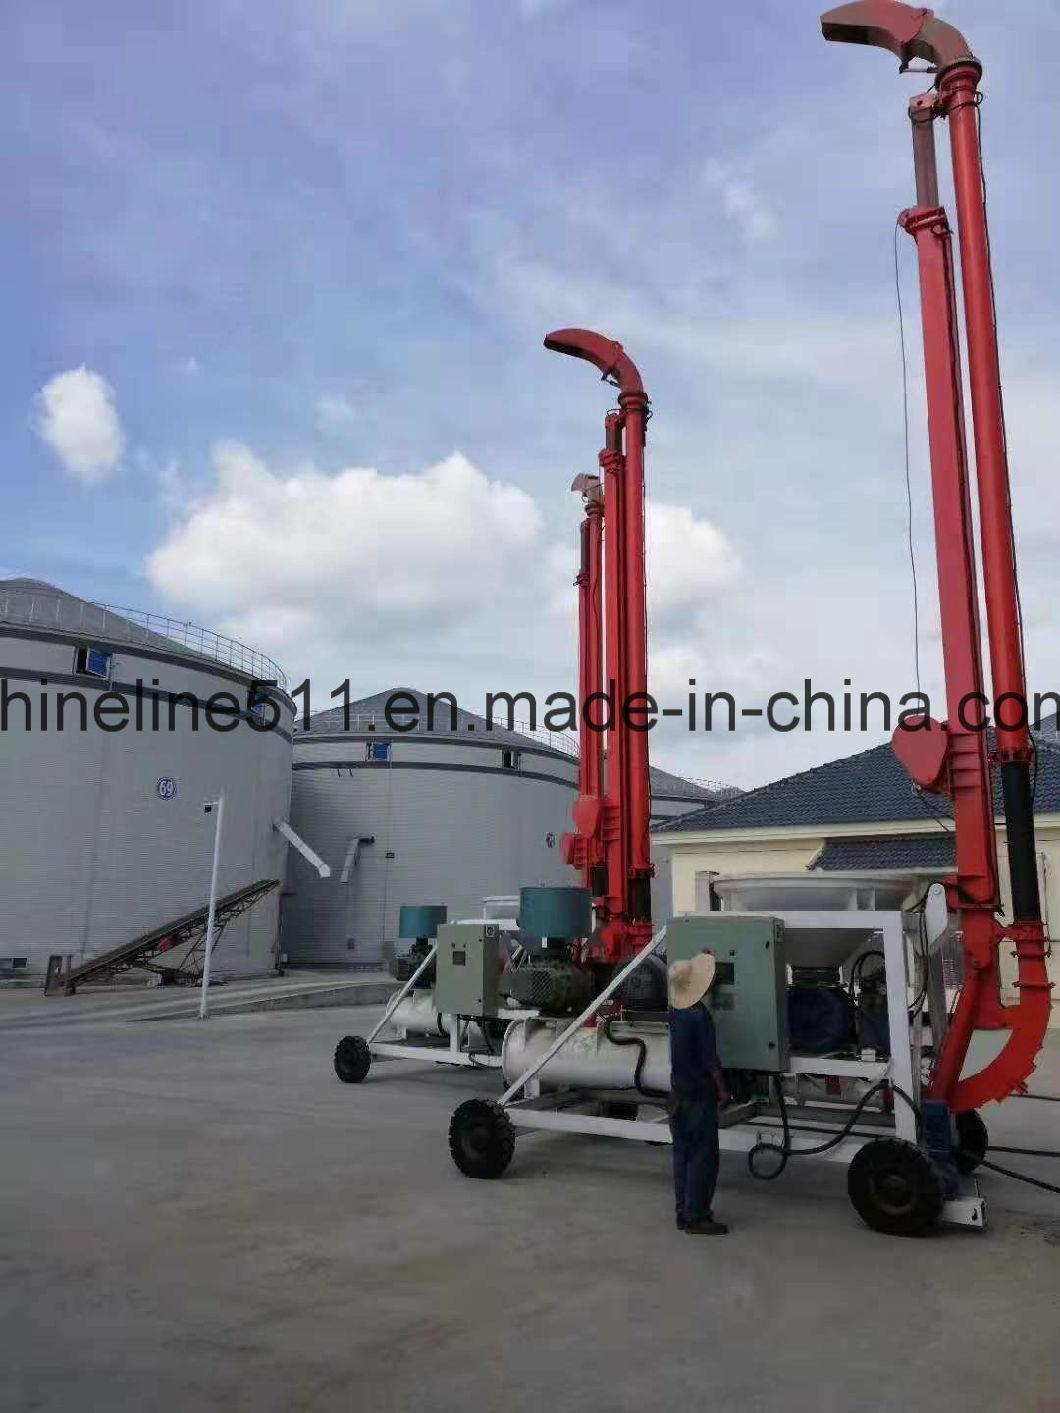 Available Heat Resistant Xiangliang Brand Ship Mobile Pneumatic Grain Unloader